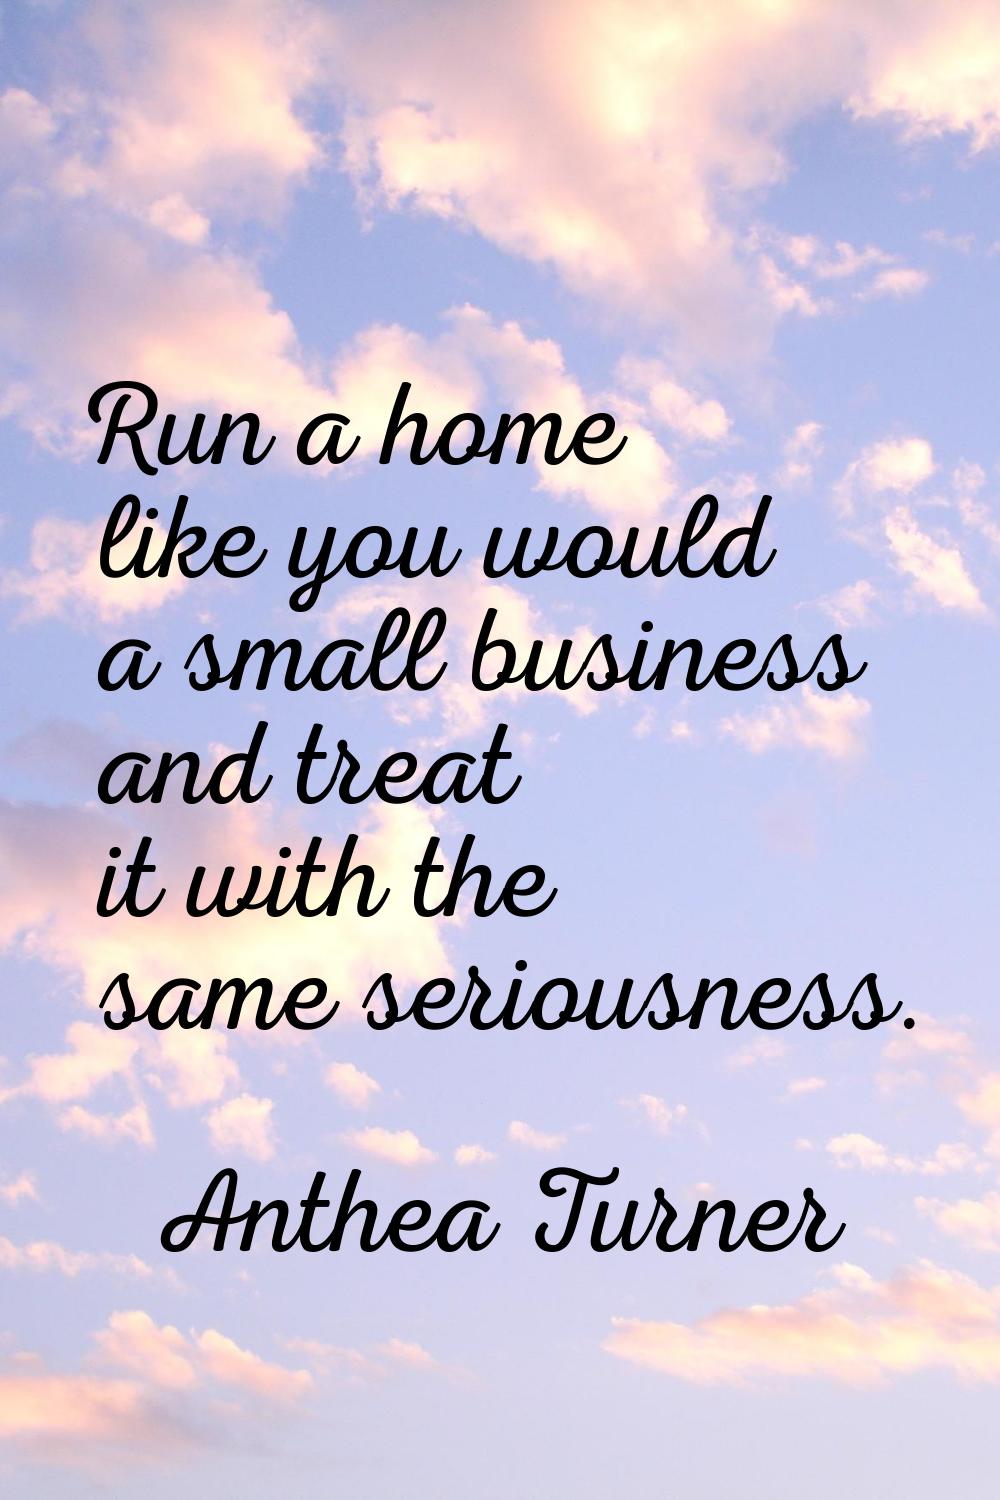 Run a home like you would a small business and treat it with the same seriousness.